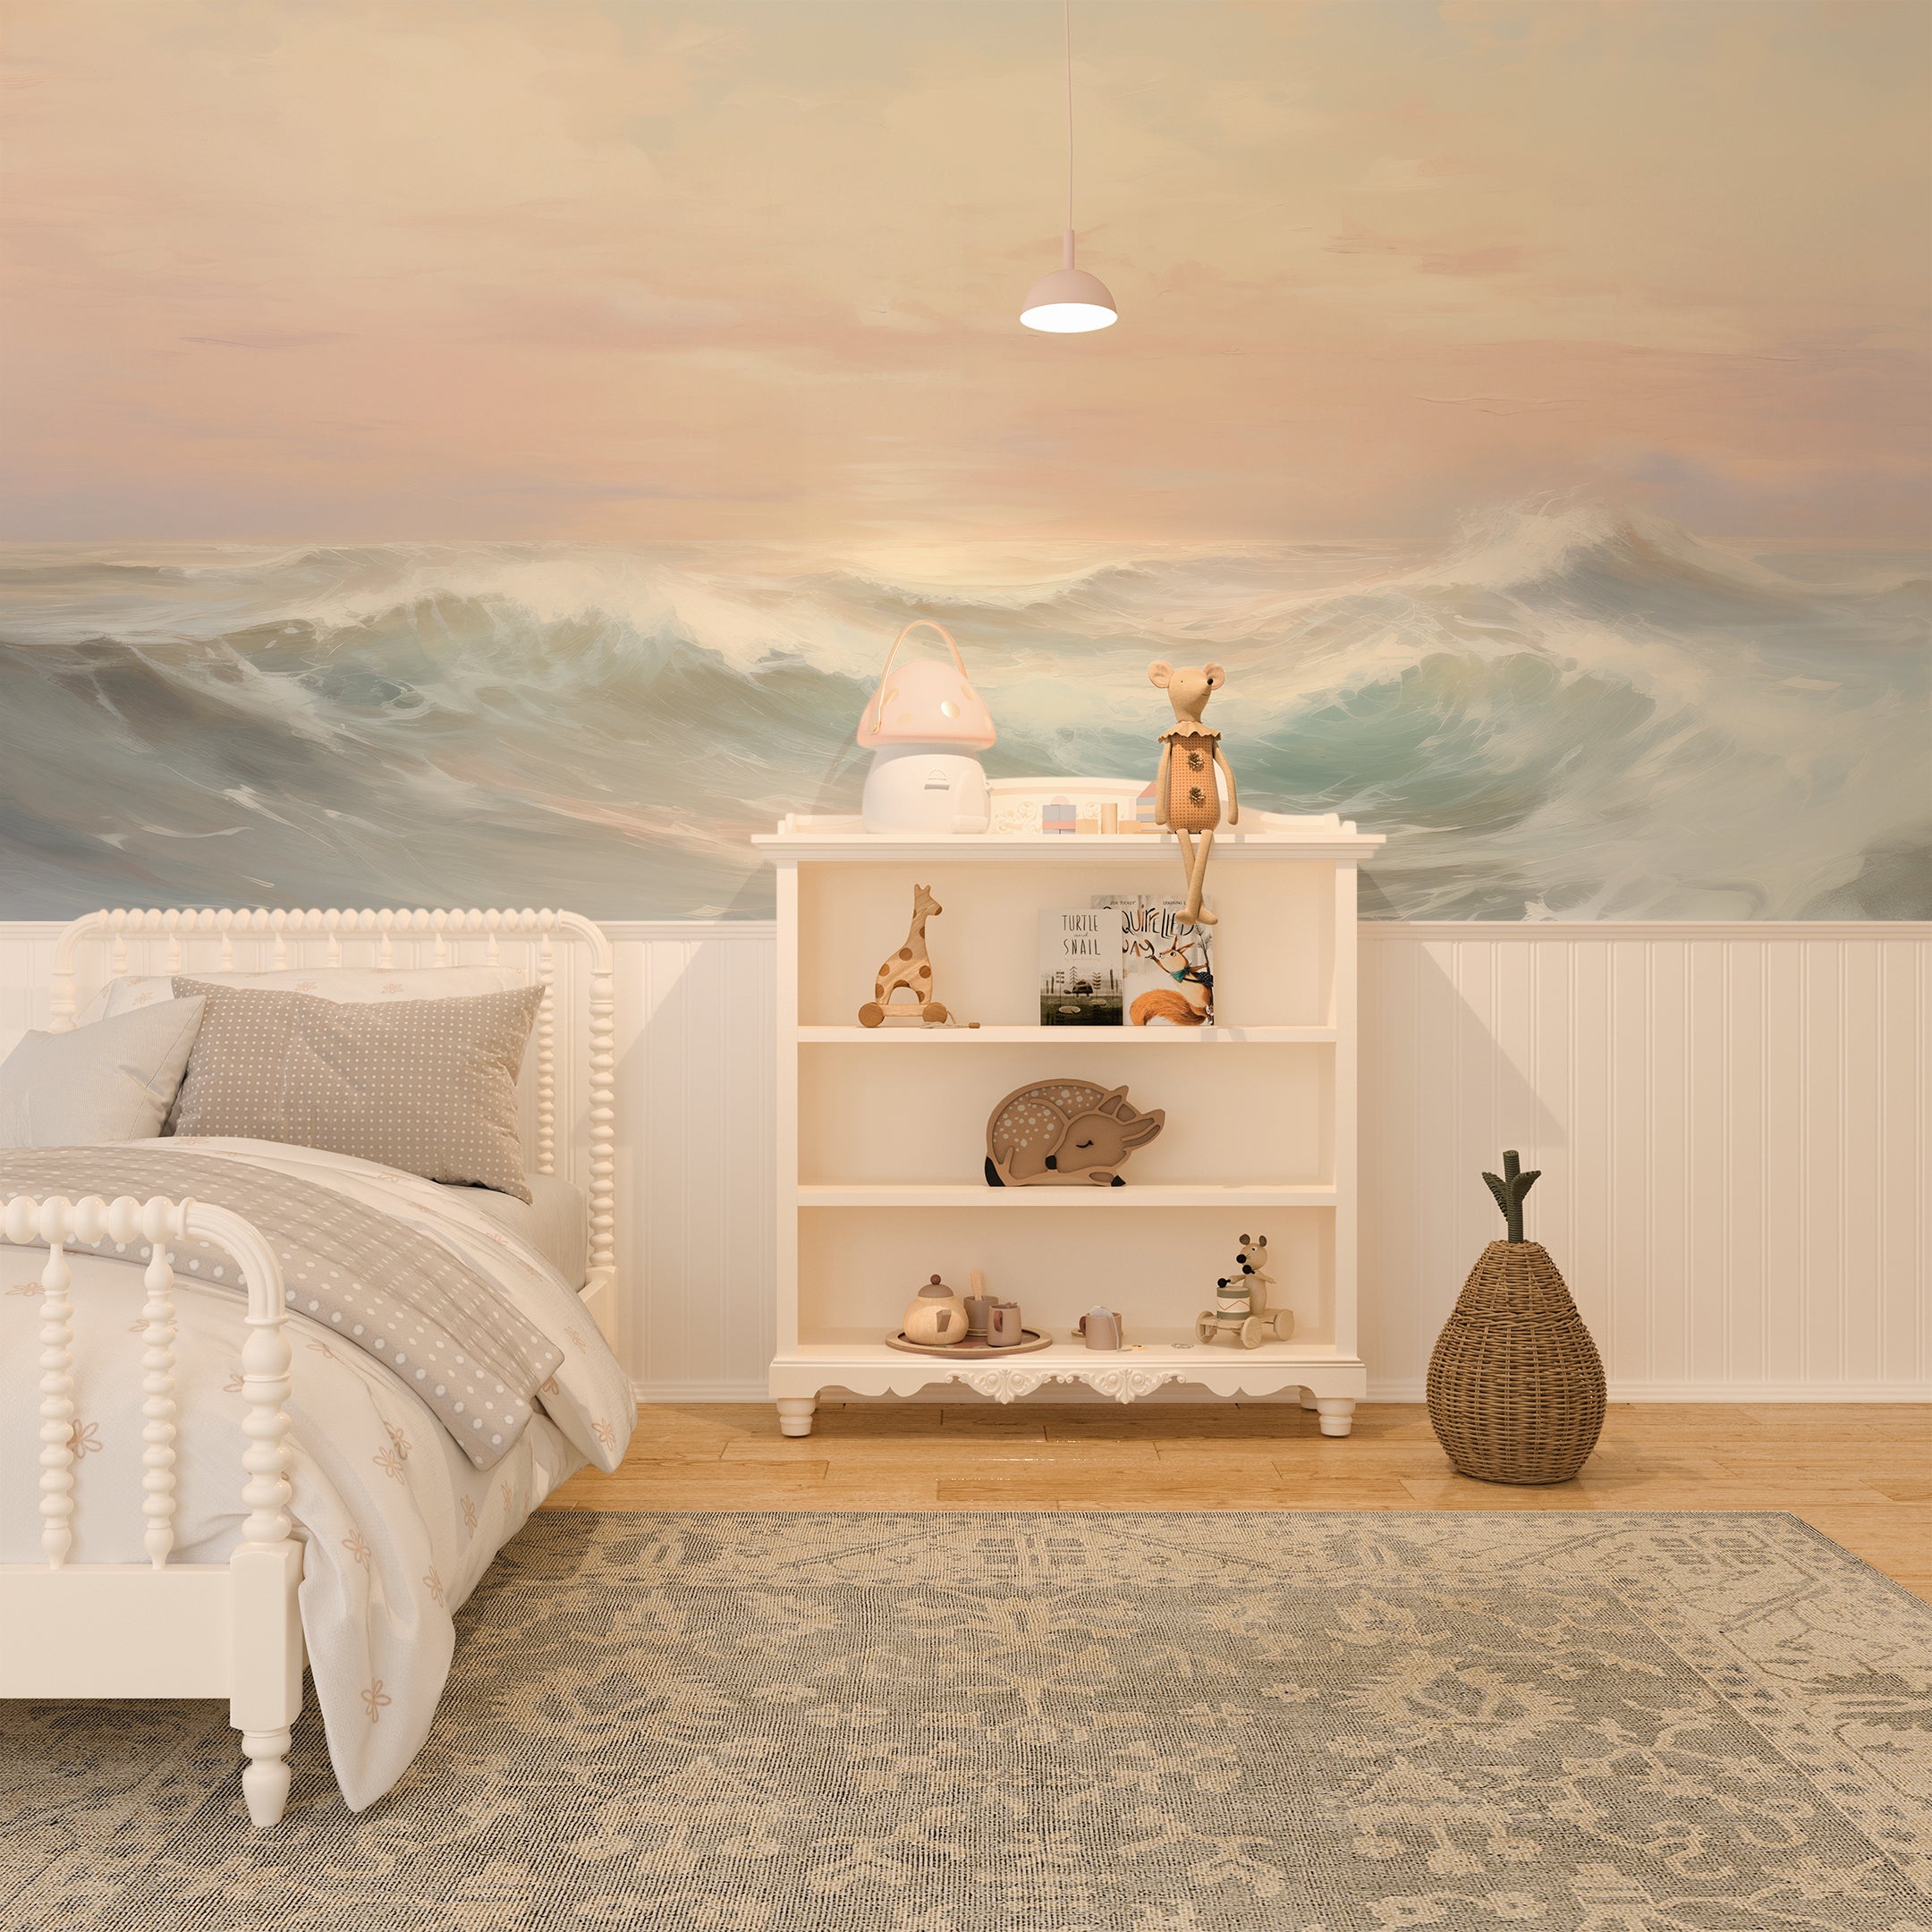 Victoria by the Sea mural creating a serene atmosphere in a child's room